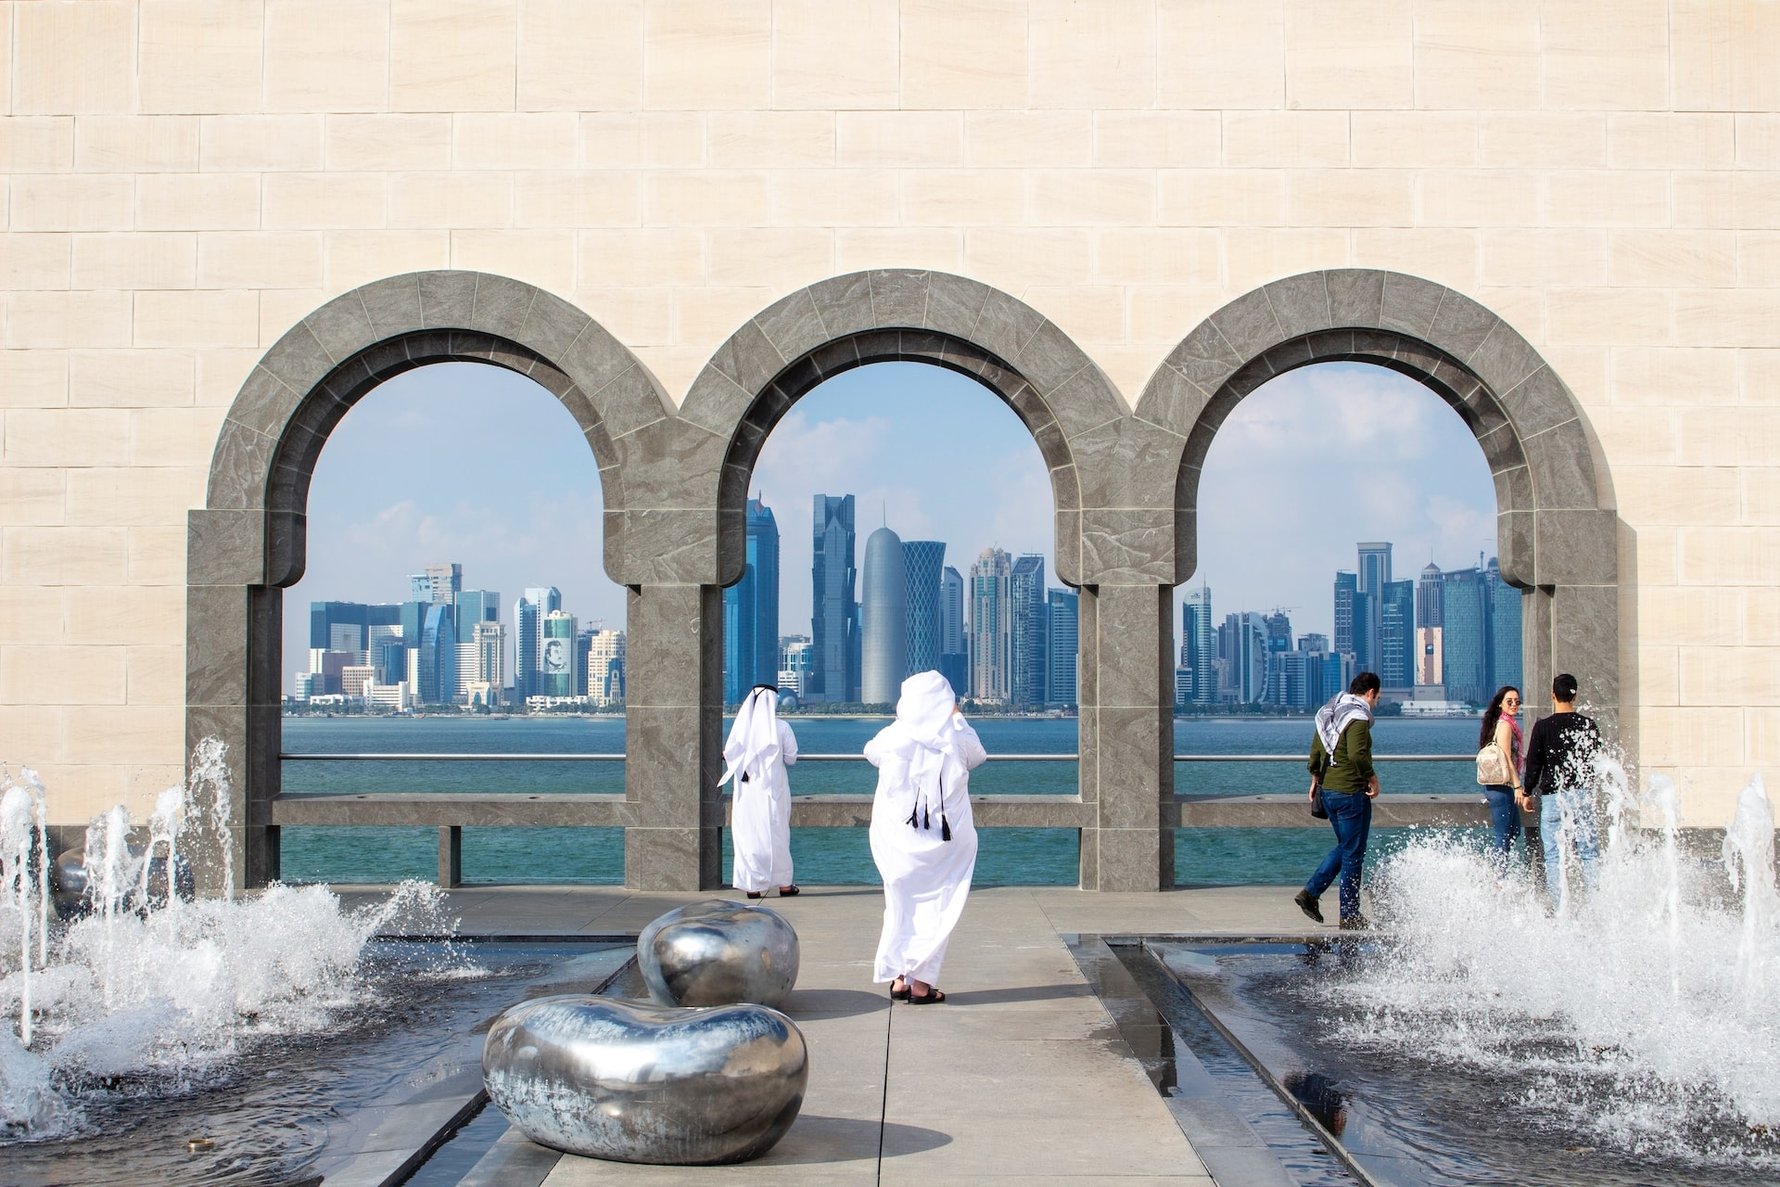 Things to know about Qatar ahead of the 2022 World Cup © micha-brandli-unsplash